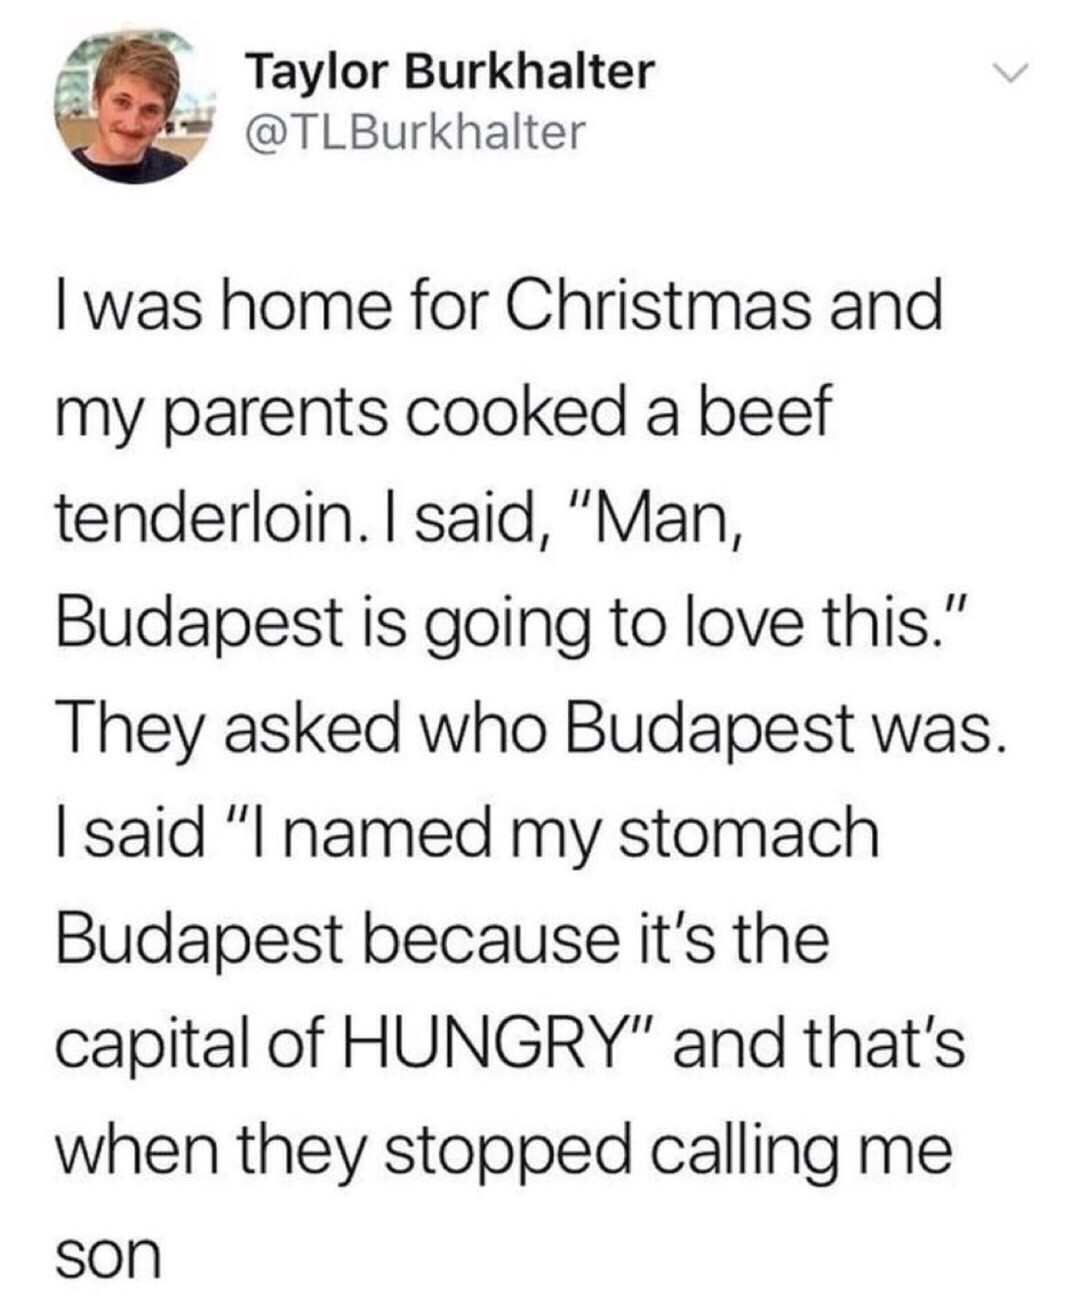 pun about Hungary and hungry